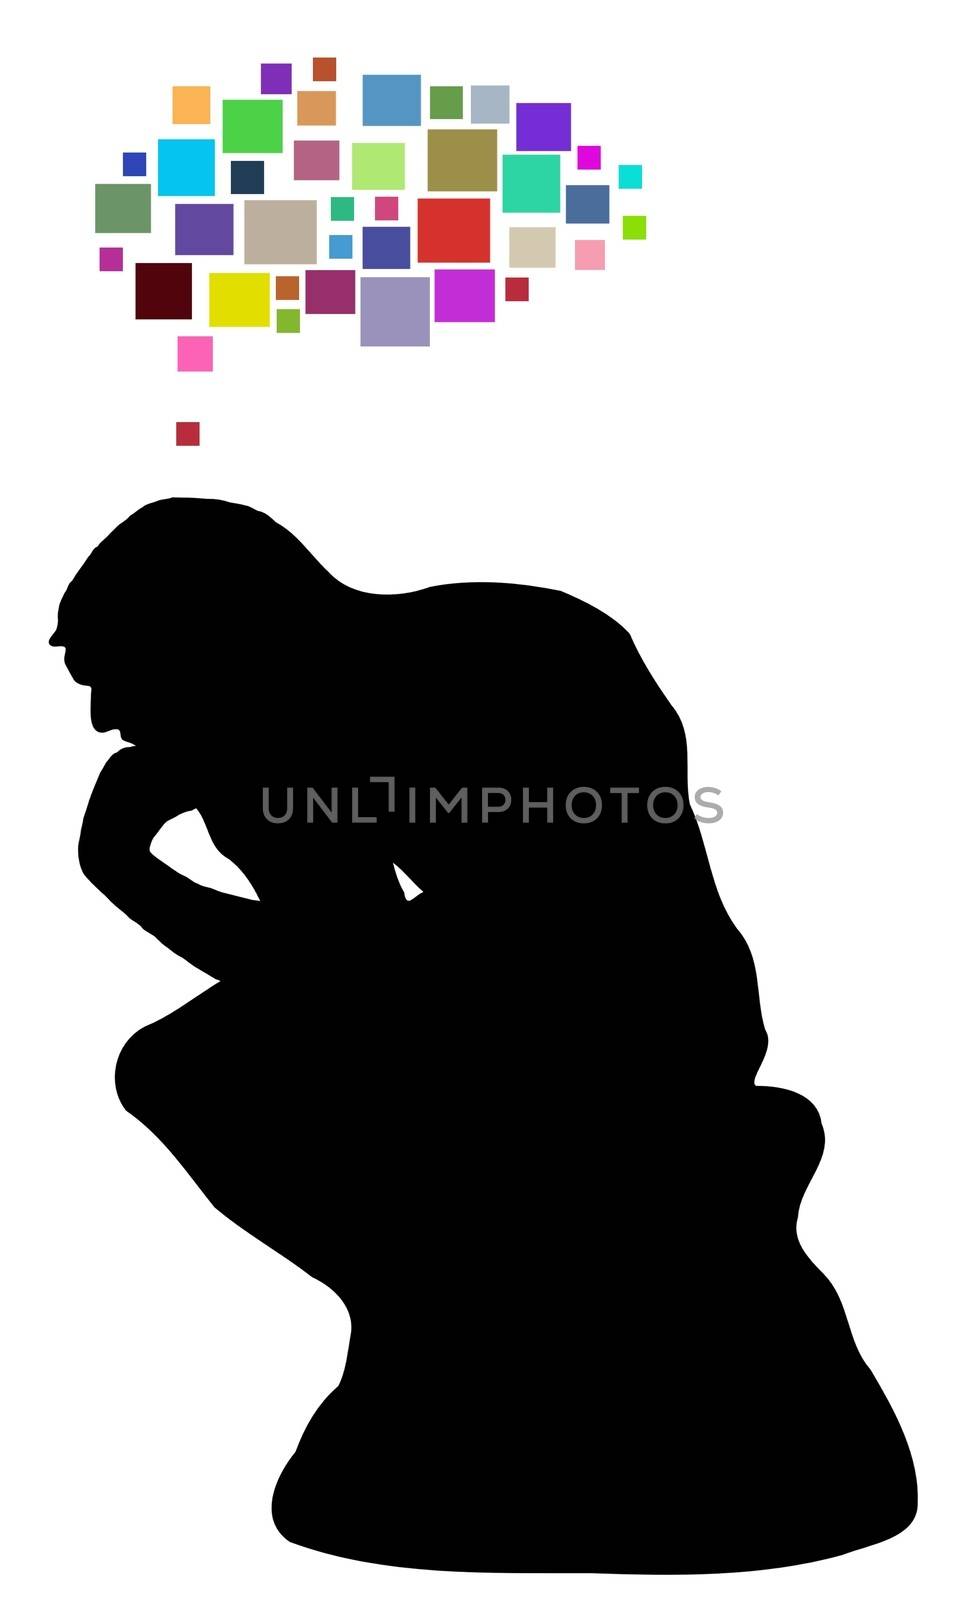 Illustration of a thinking man with a thought bubble made of colorful squares